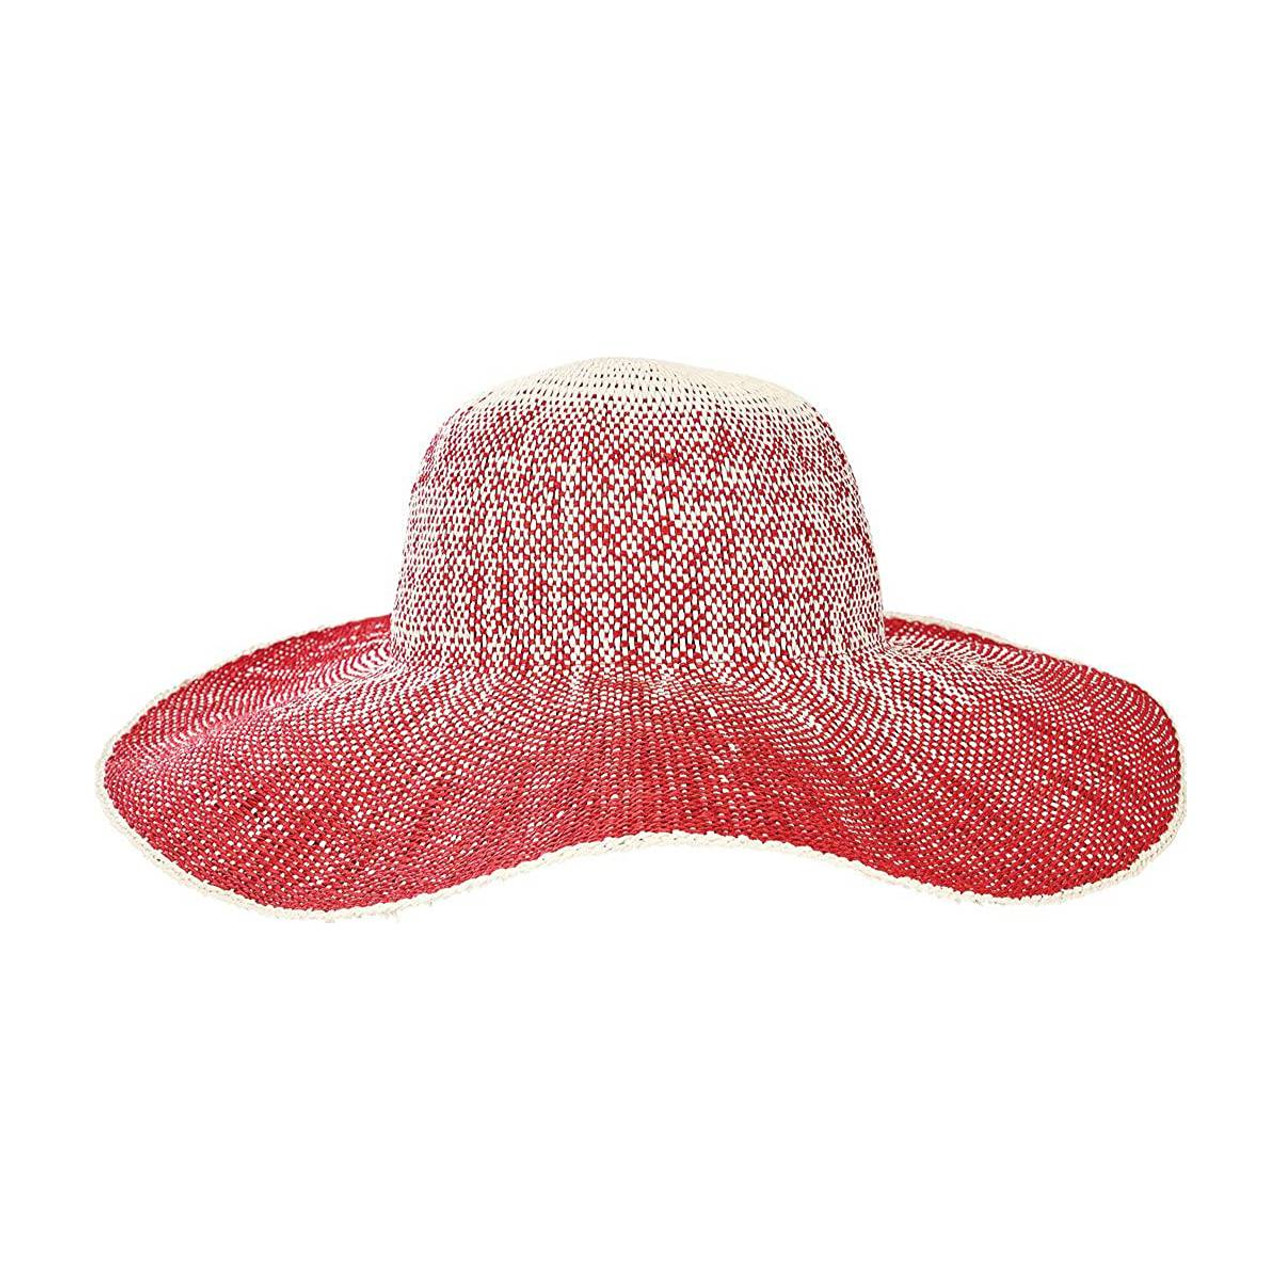 San Diego Hat Company Women's Ombre Floppy Sun Hat, Sunhat, Red, OS - Miami  Hat Shop